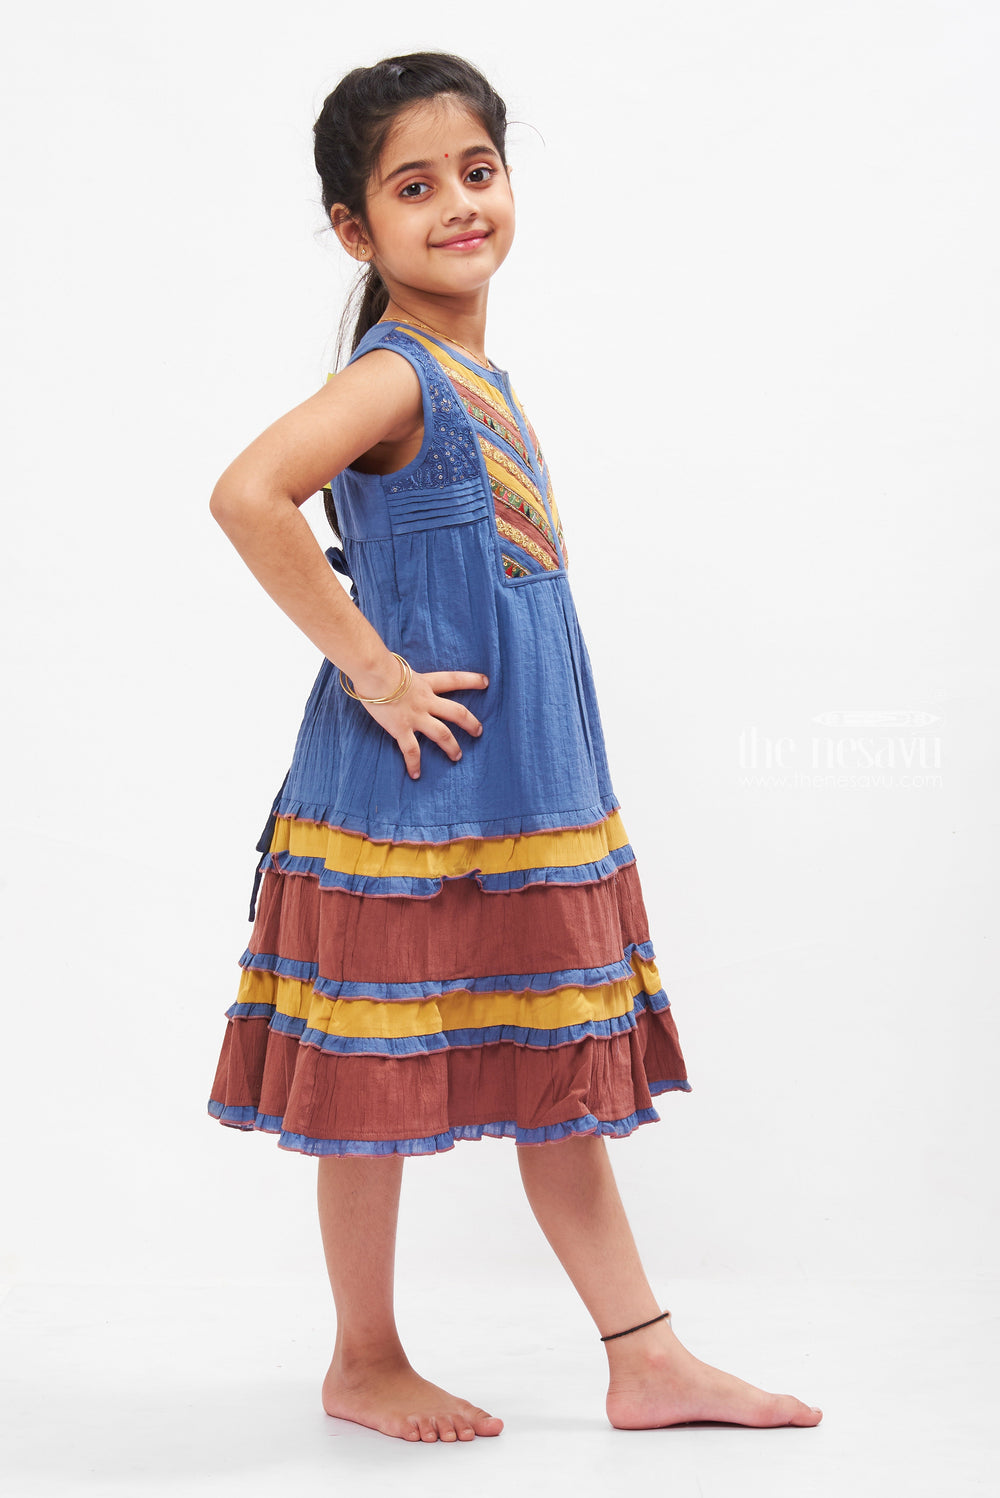 The Nesavu Girls Cotton Frock Rustic Charm Layered Cotton Frock with Ethnic Accents for Girls Nesavu Girls Ethnic Cotton Summer Dresses | Layered Ruffle Cotton Frock | The Nesavu